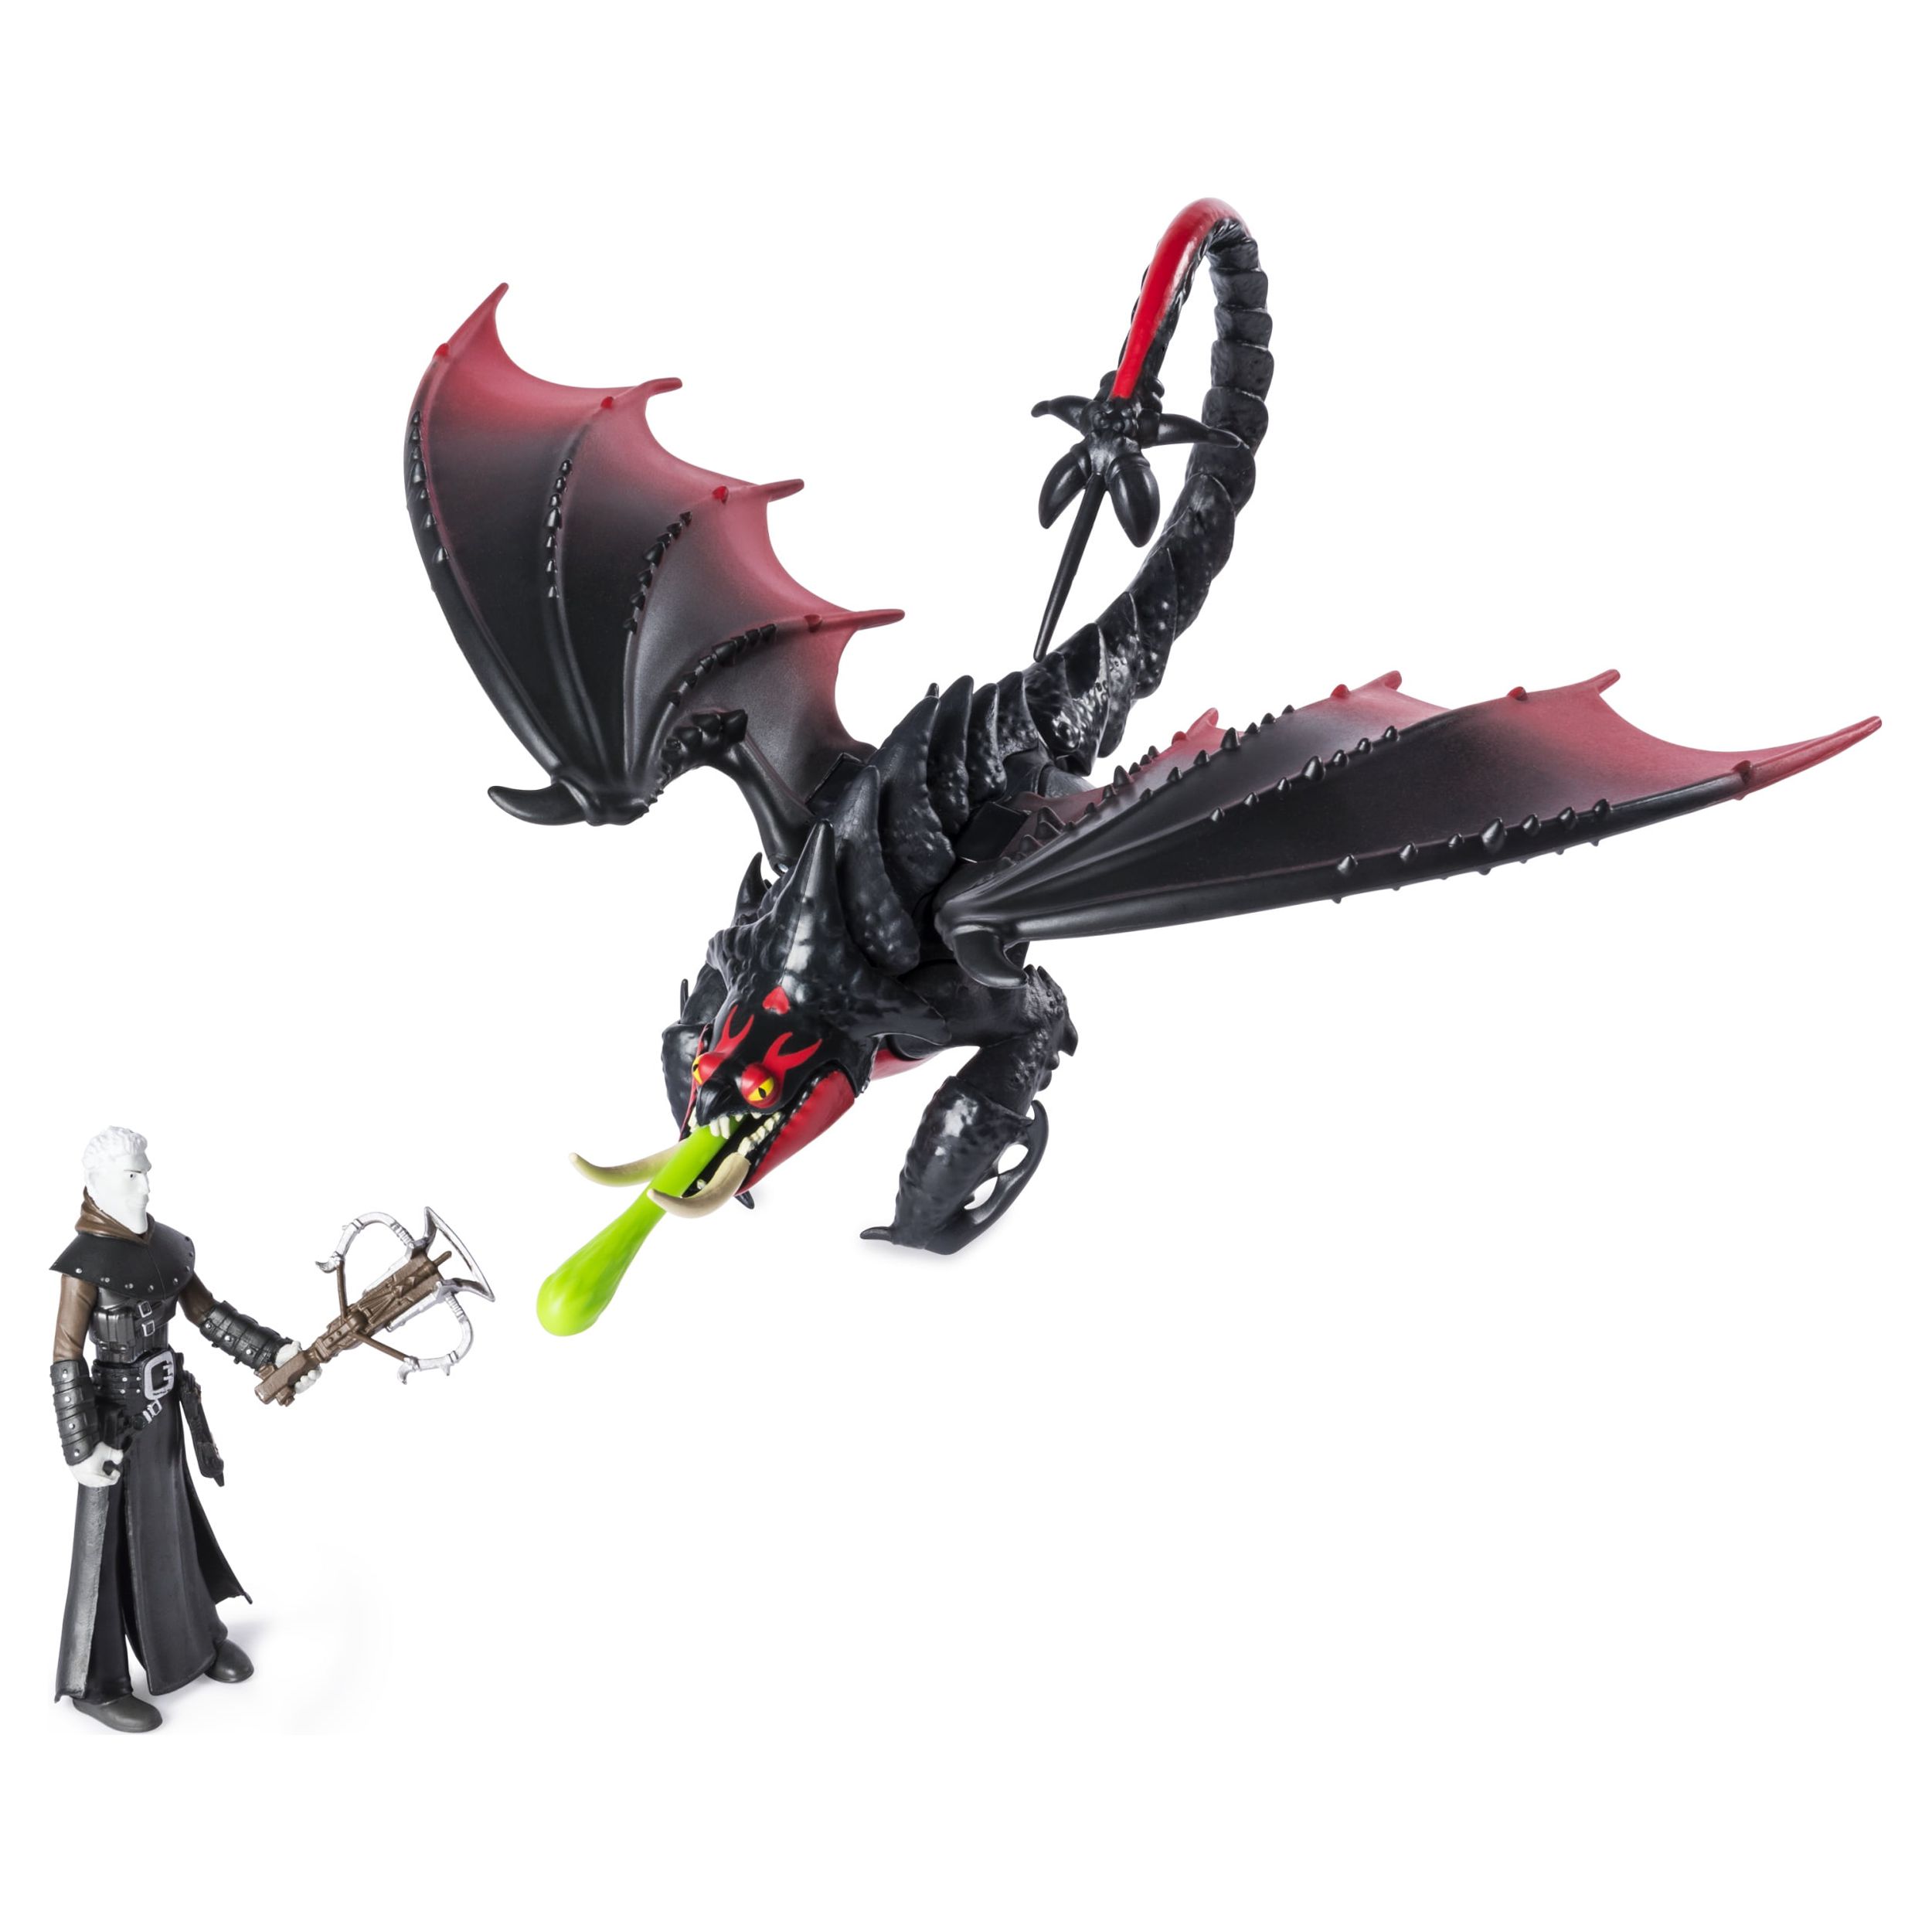 DreamWorks Dragons, Deathgripper and Grimmel, Dragon with Armored Viking Figure, for Kids Aged 4 and Up - image 3 of 6